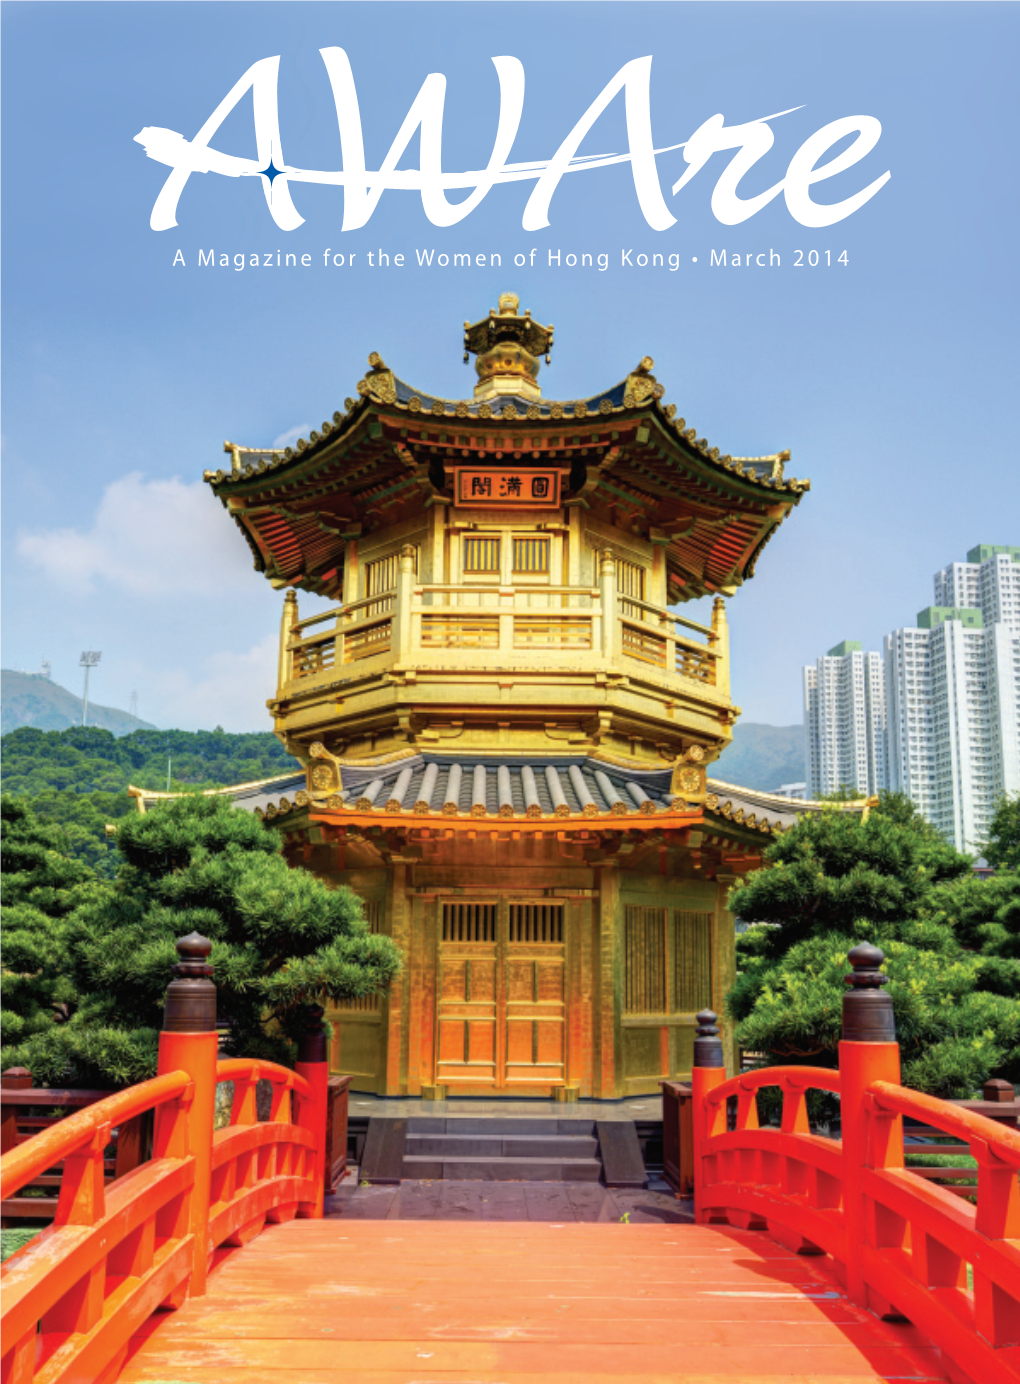 A Magazine for the Women of Hong Kong • March 2014 Carpetbuyer HHP 210X143 Aw2 Op.Pdf 1 13年8月5日 下午6:23